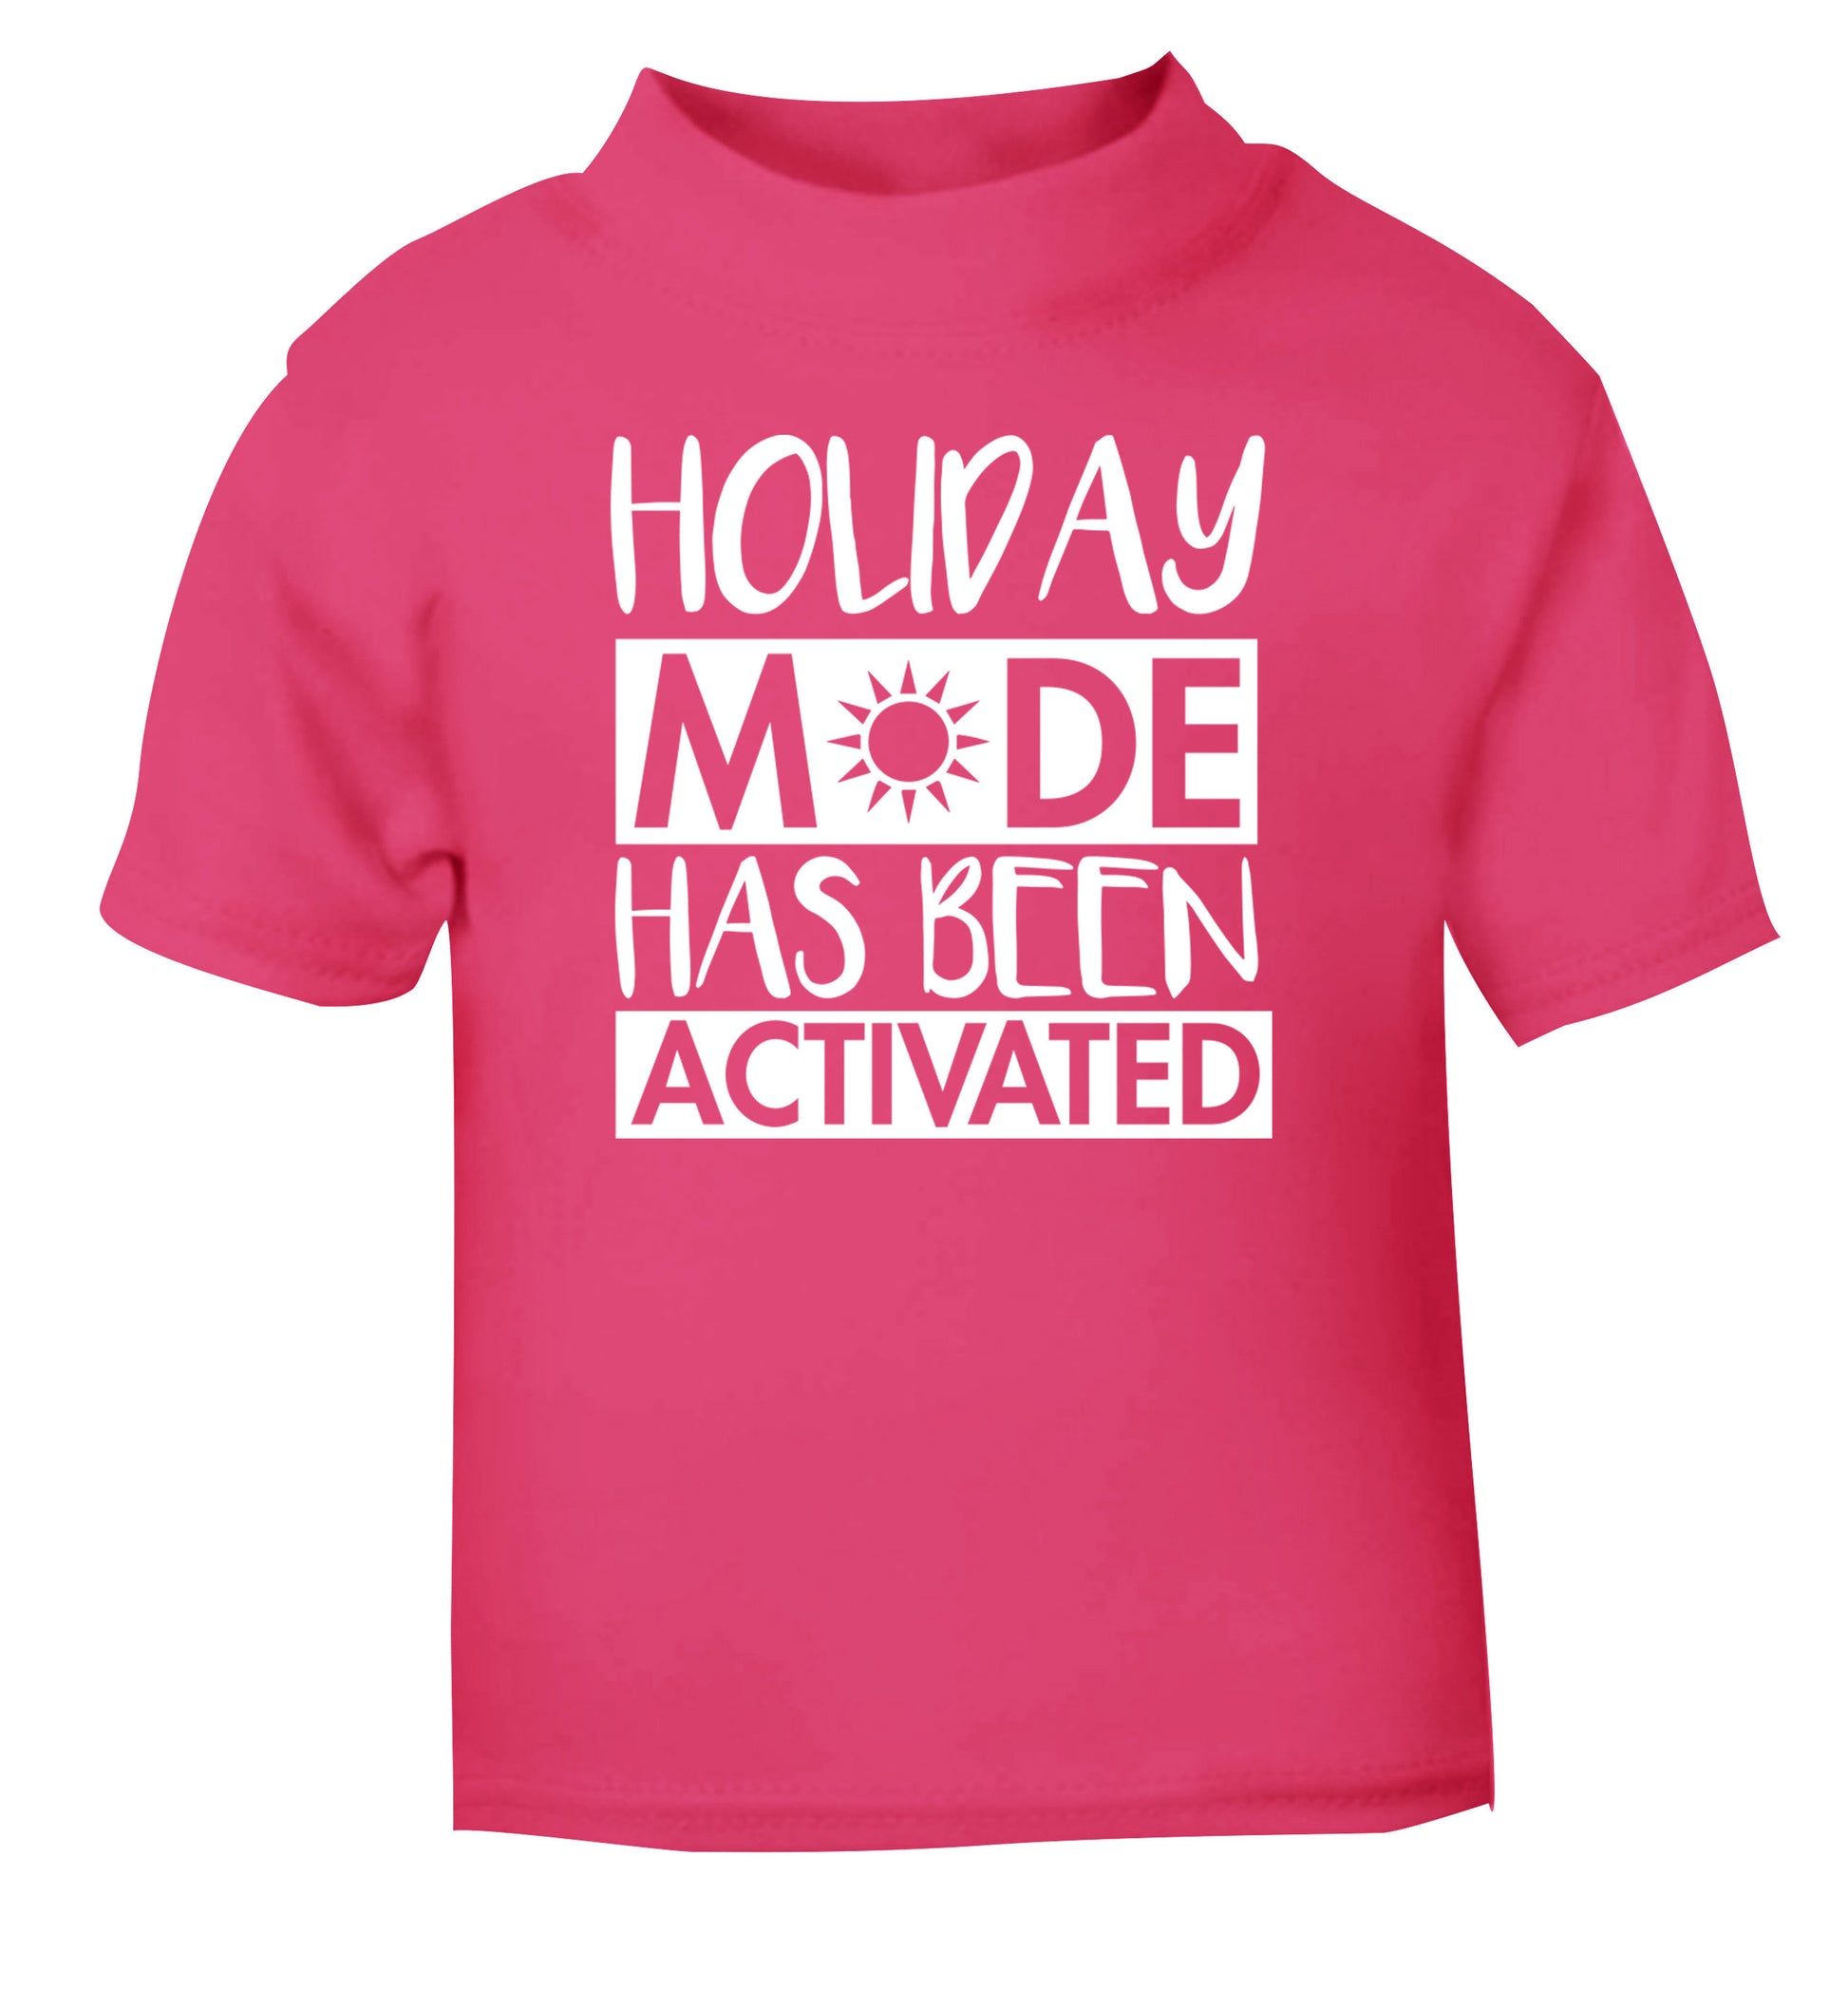 Holiday mode has been activated pink Baby Toddler Tshirt 2 Years